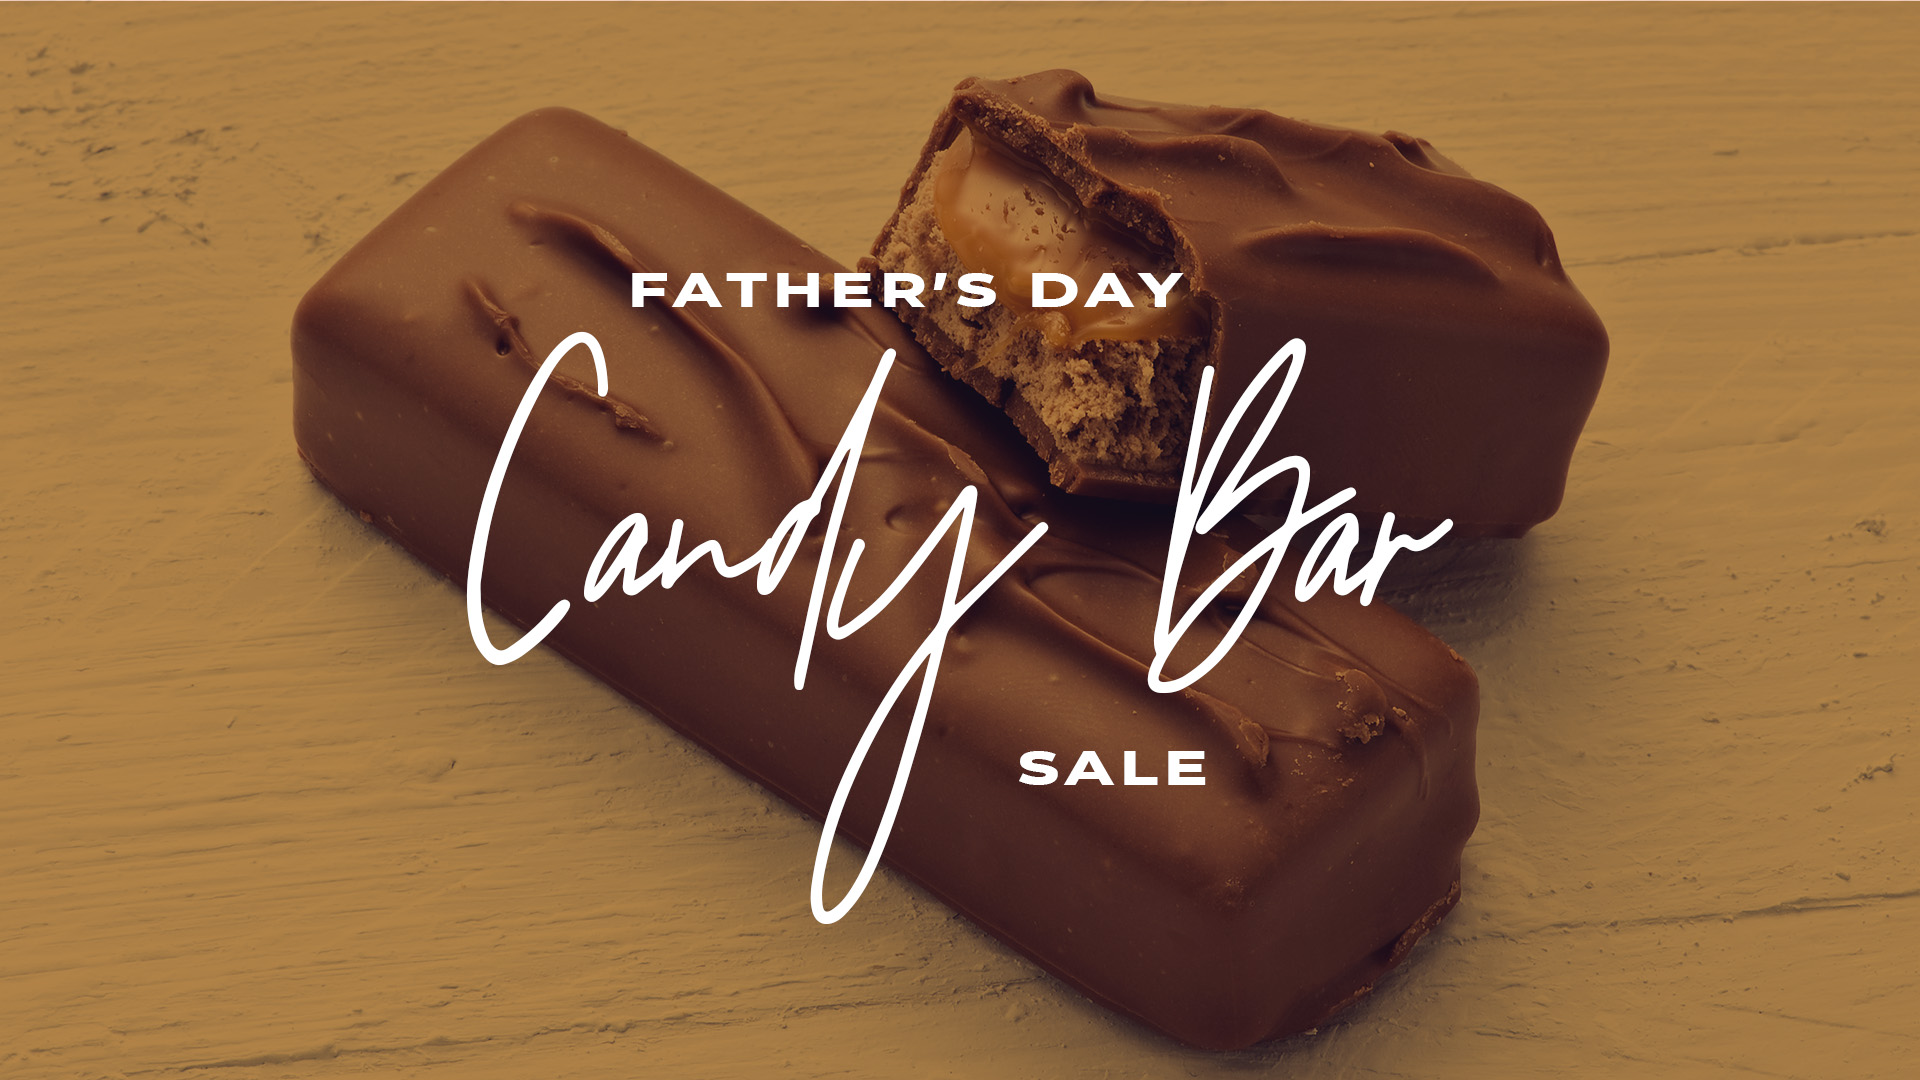 Father’s Day Candy Bar Sale